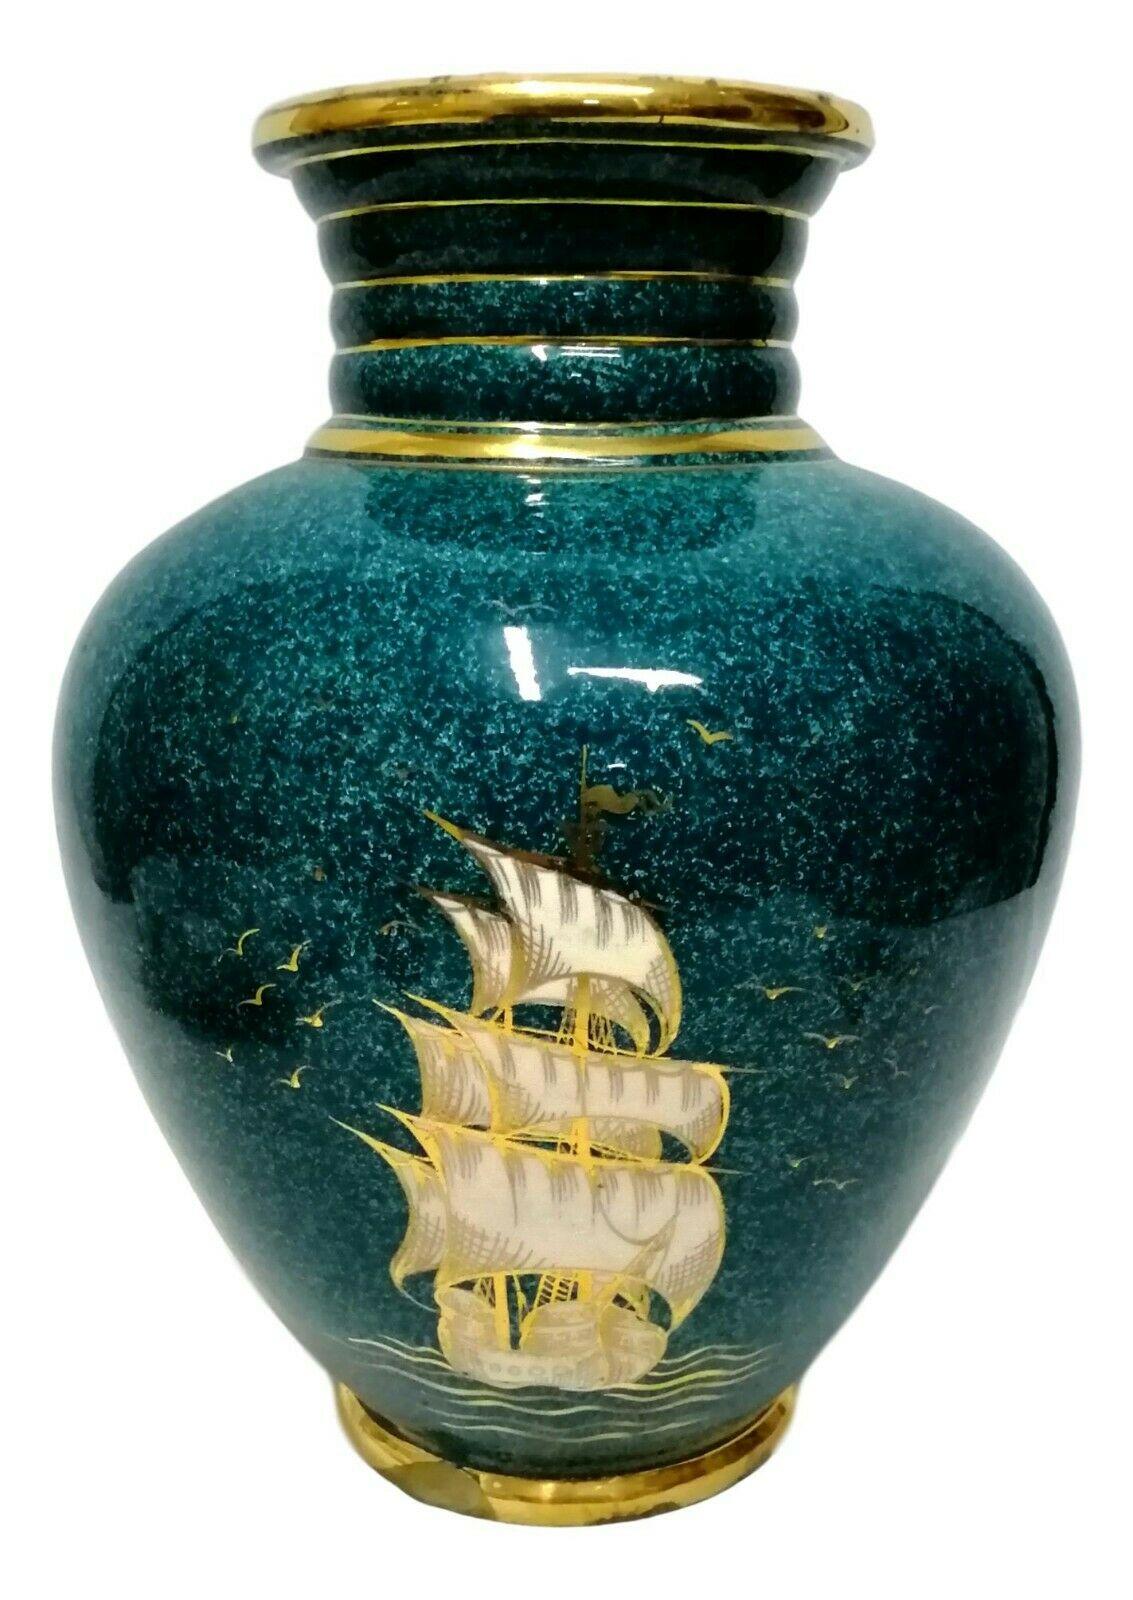 Ceramic Vase Produced by Barraud, Messeri & C., 1940s For Sale 2